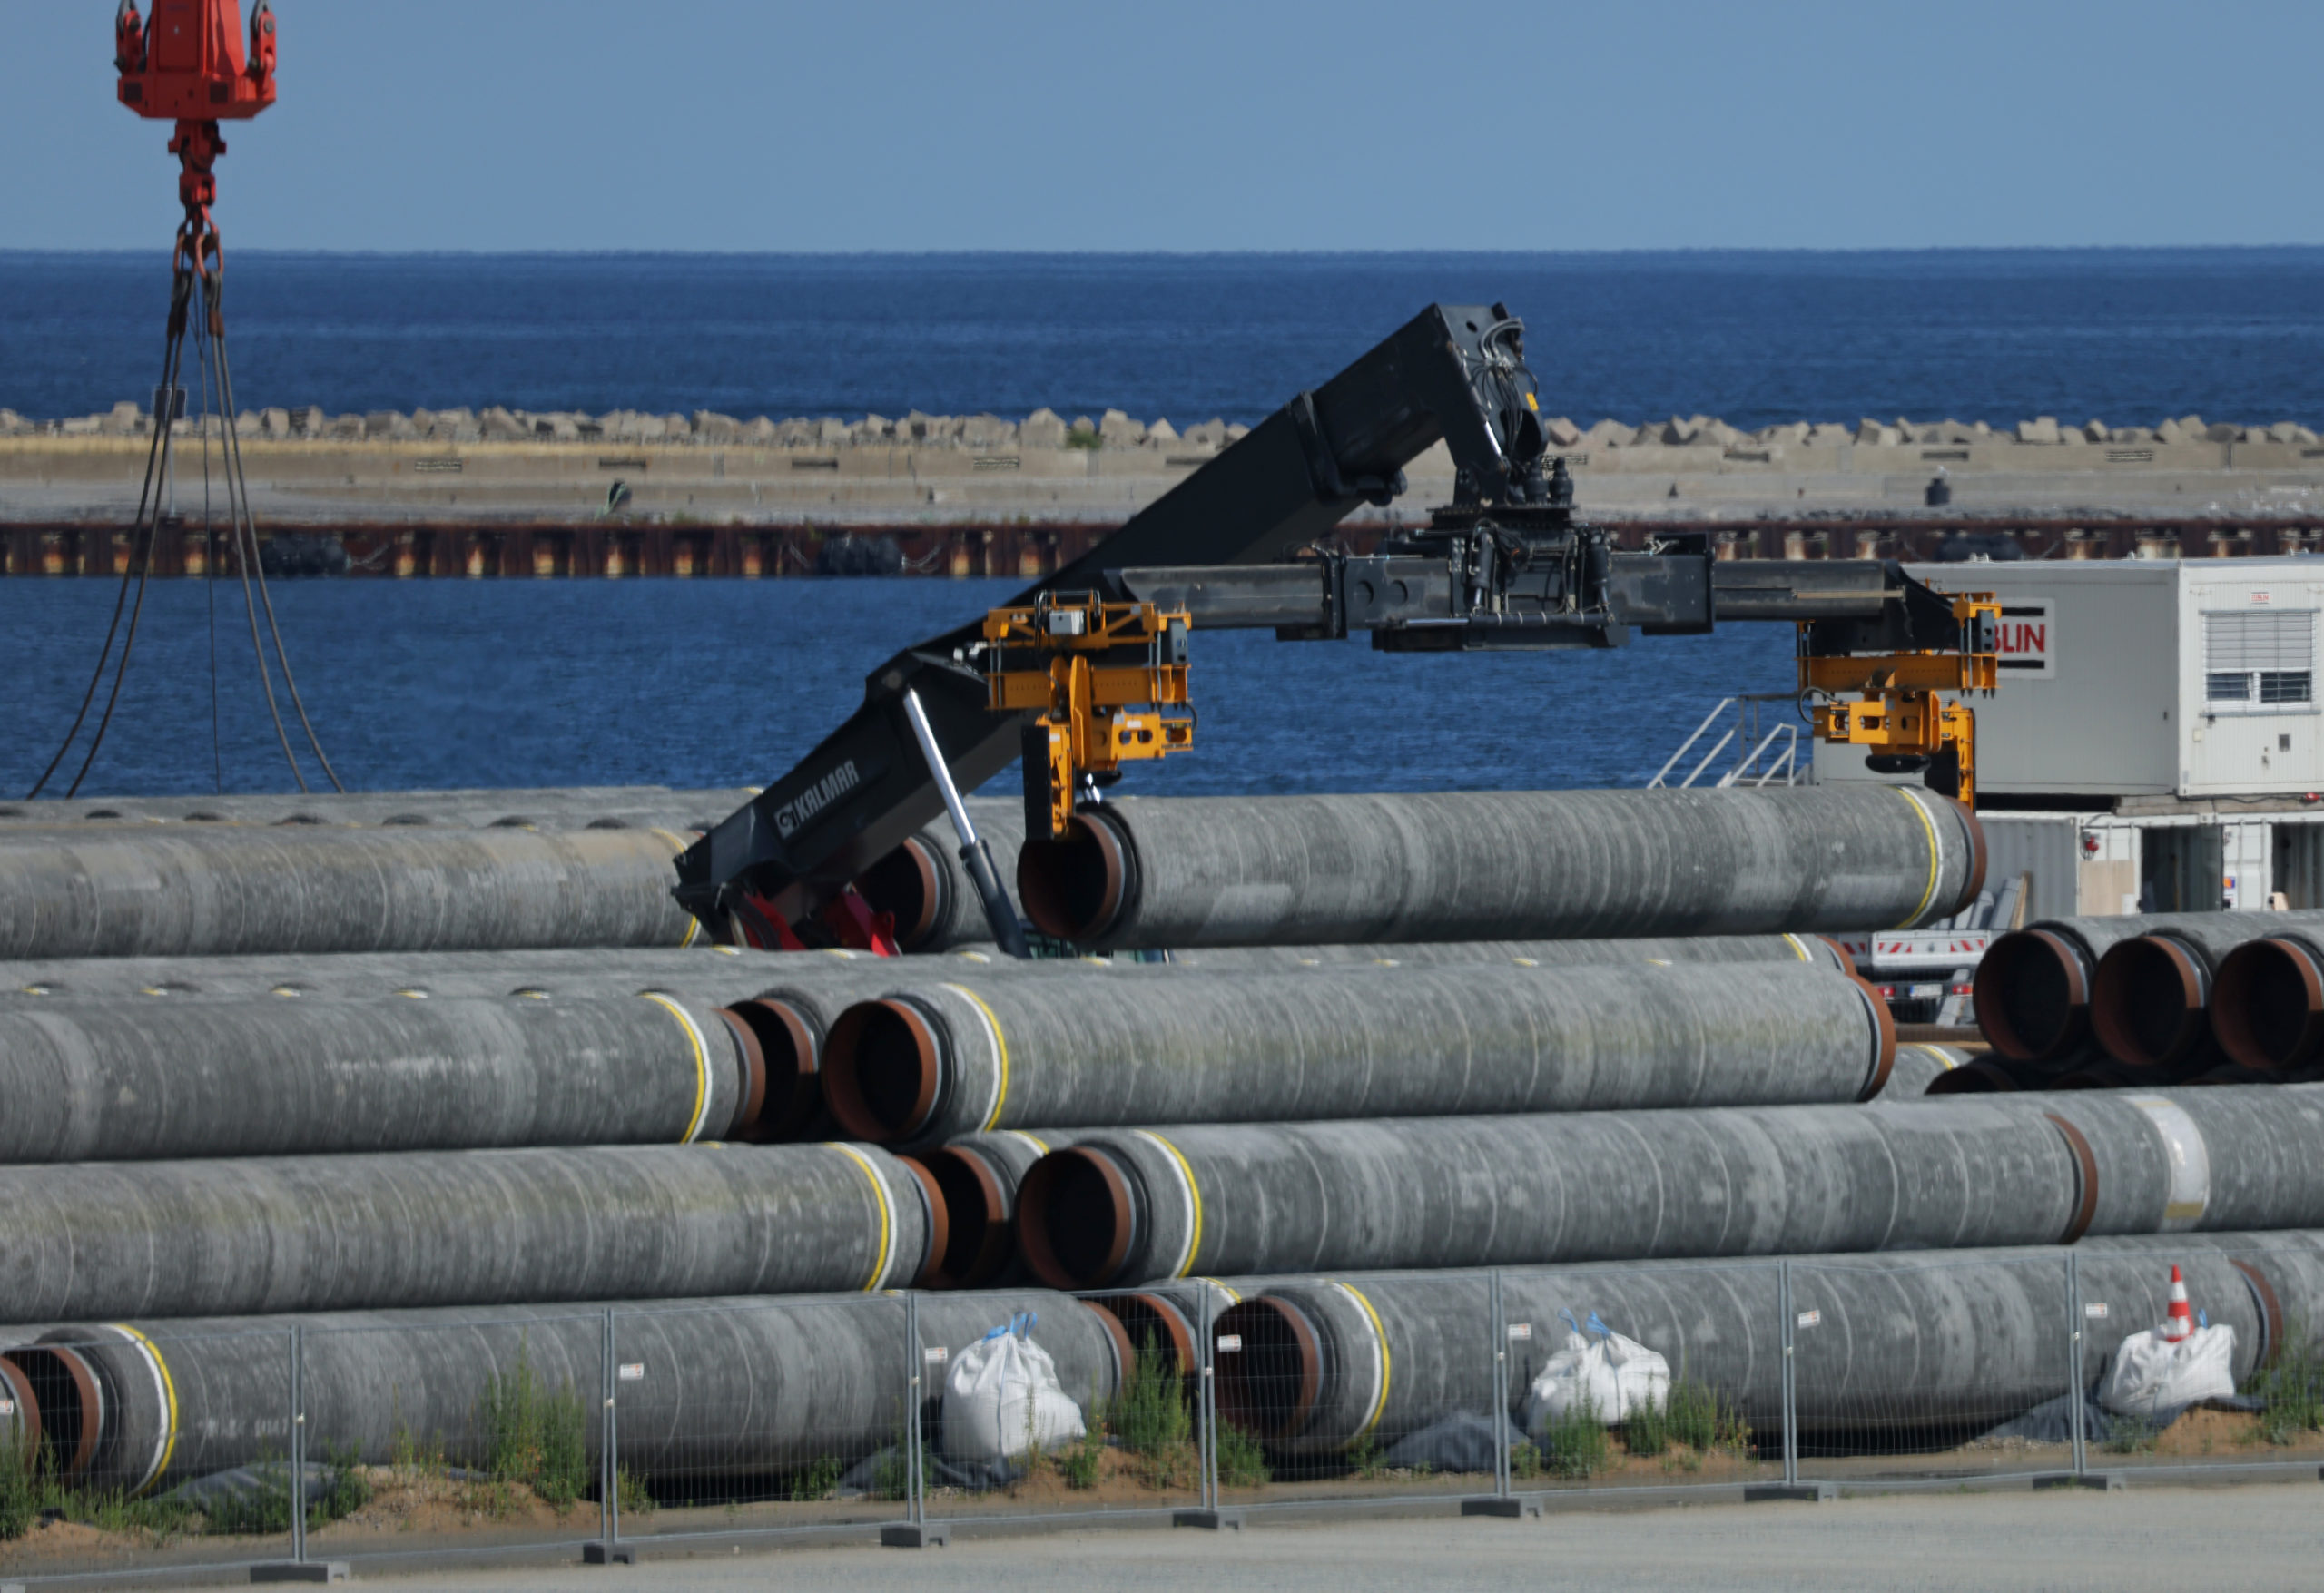 Sections of pipe for the Nord Stream 2 gas pipeline lie stacked on Aug. 4 in Sassnitz, Germany. (Sean Gallup/Getty Images)